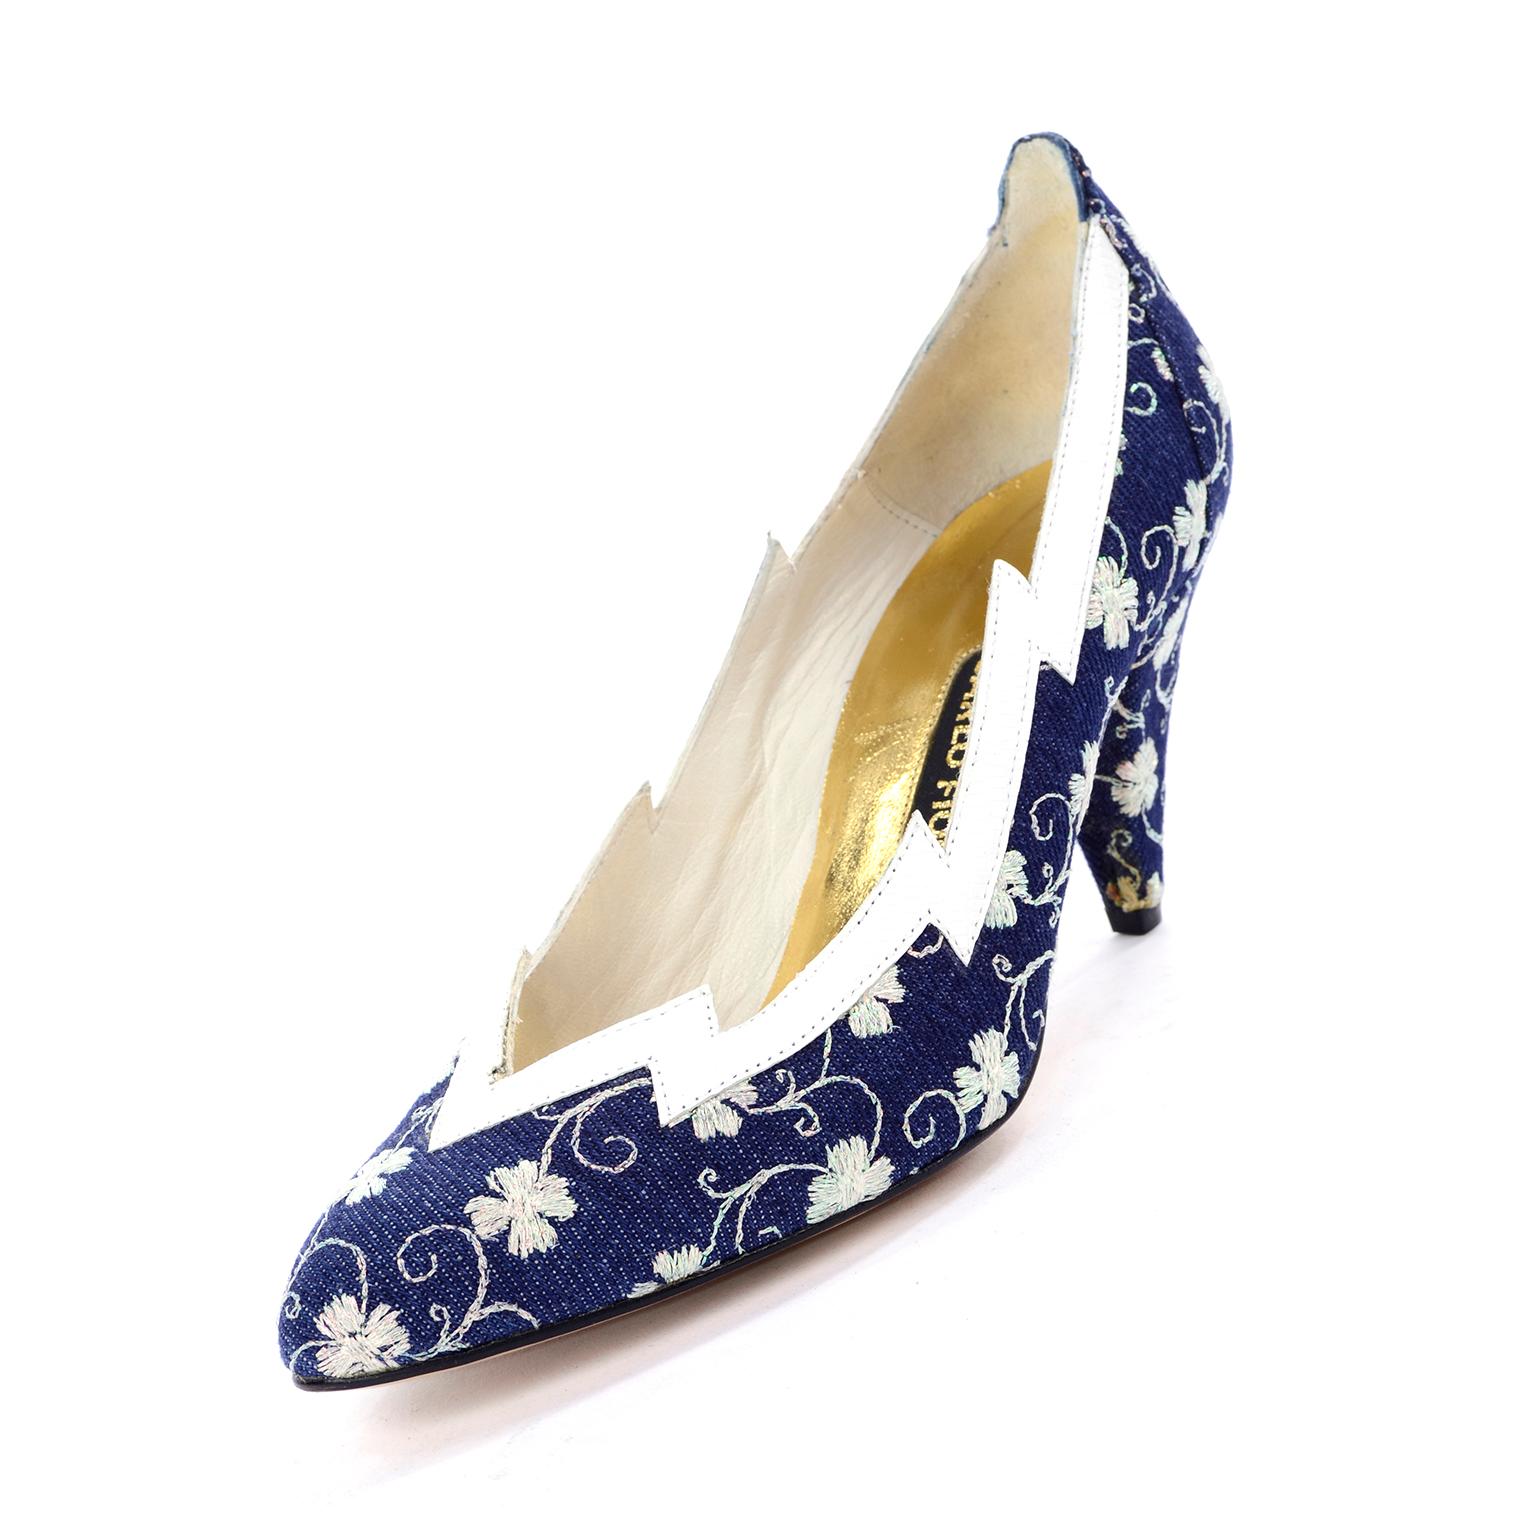 Women's Deadstock Carlo Fiori Navy Blue & White Embroidered Shoes Unworn Size 7B